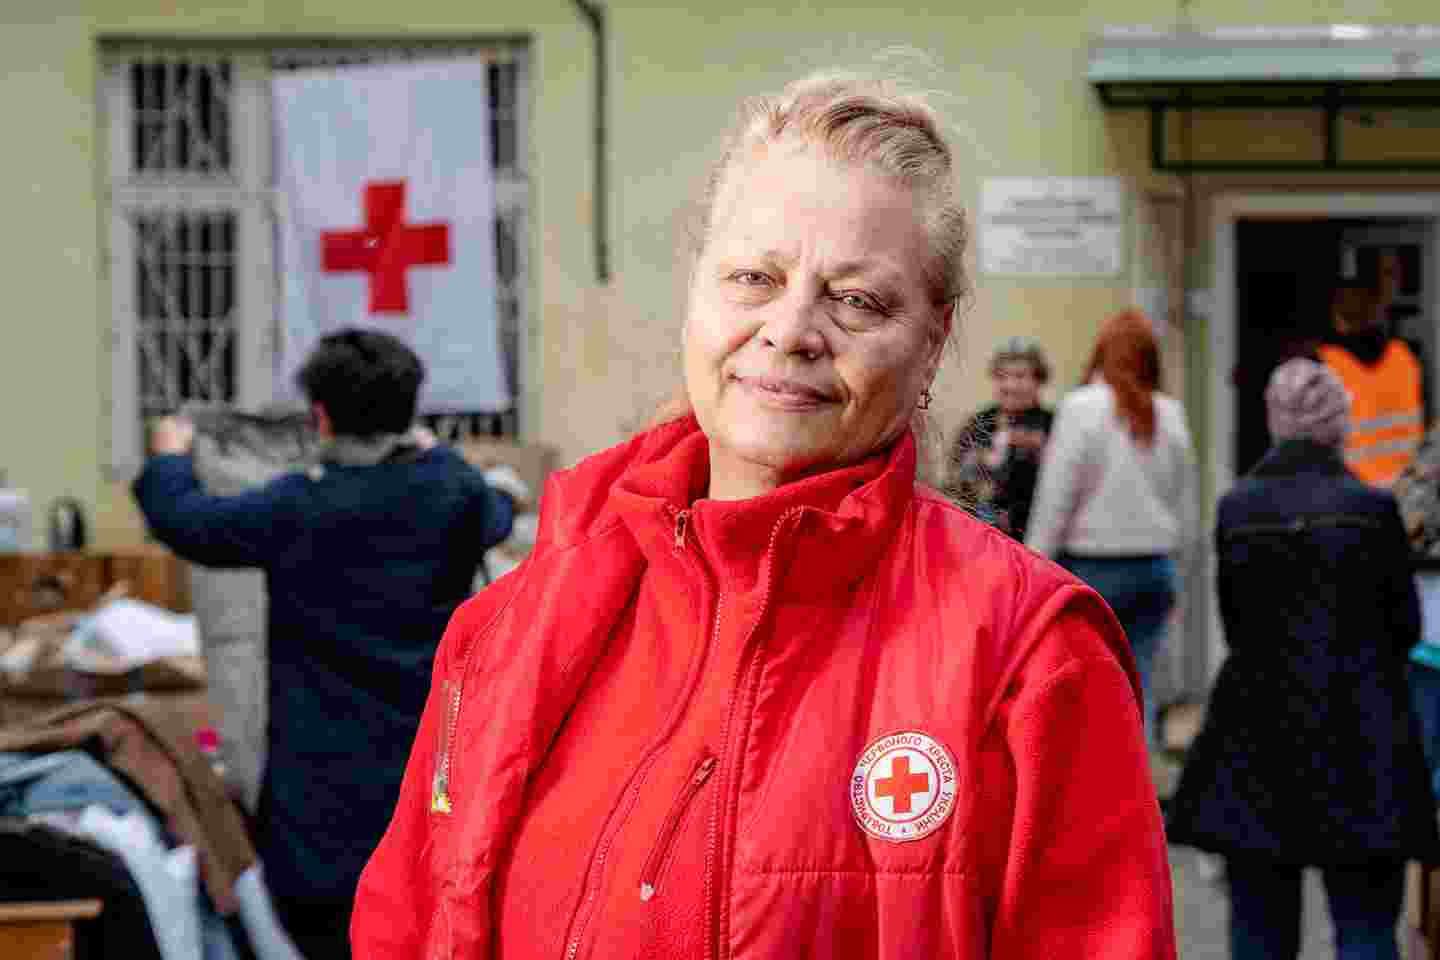 A woman wearing the Red Cross’ vest in medium close-up.